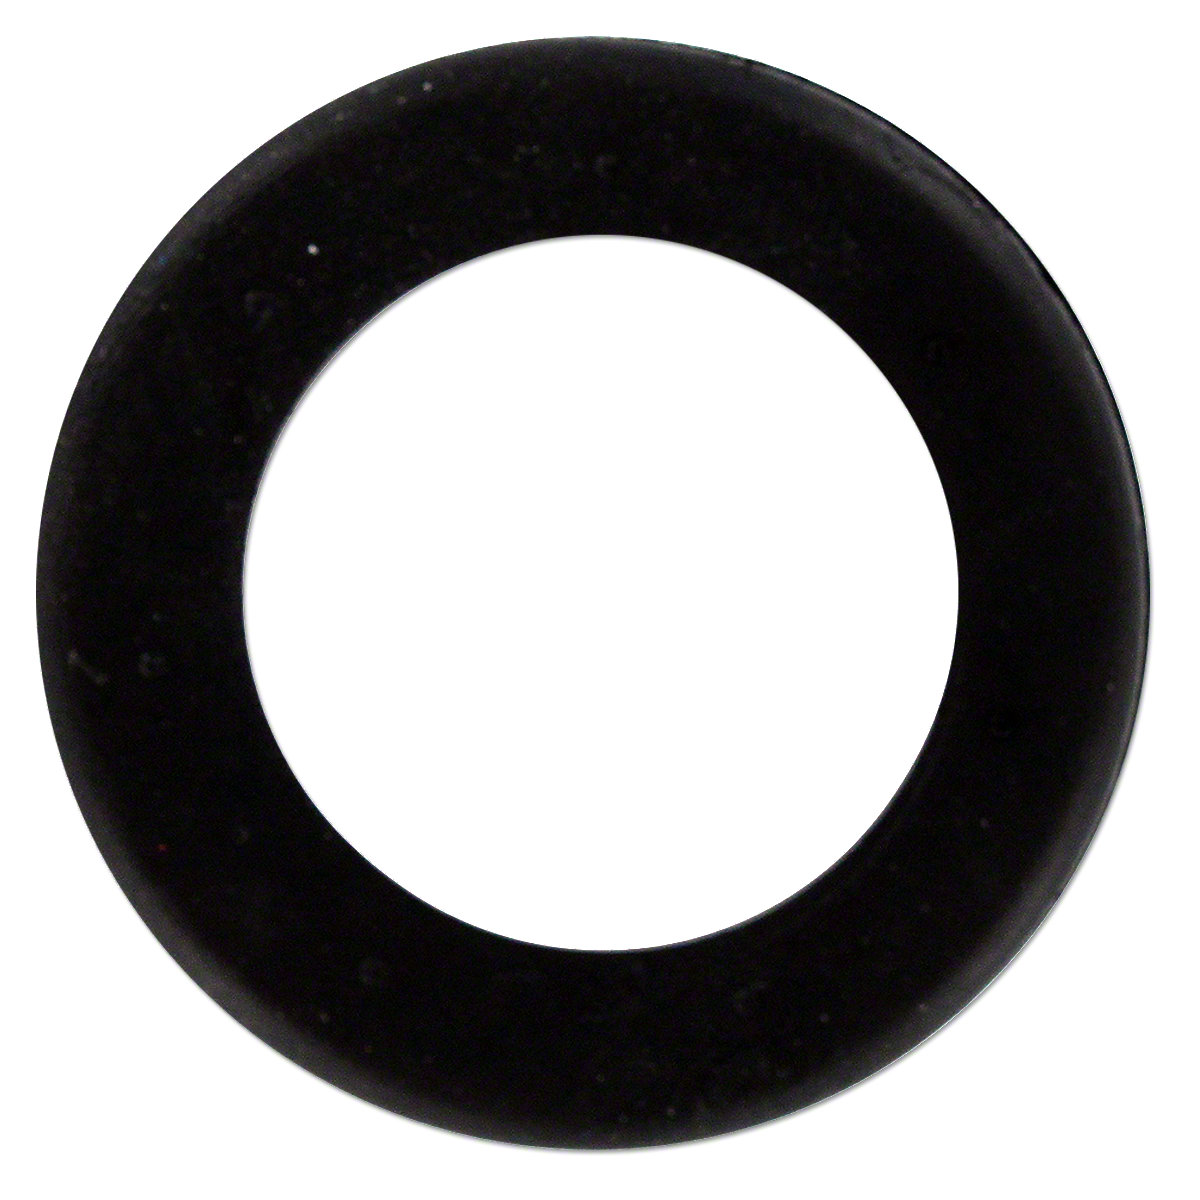 Cab Electrical Grommet For Farmall: 786, 886, 986, 1086, 1486, 1586, 3088, 3288, 3488, 3688, 5088, 5288, 5488, Hydro 186